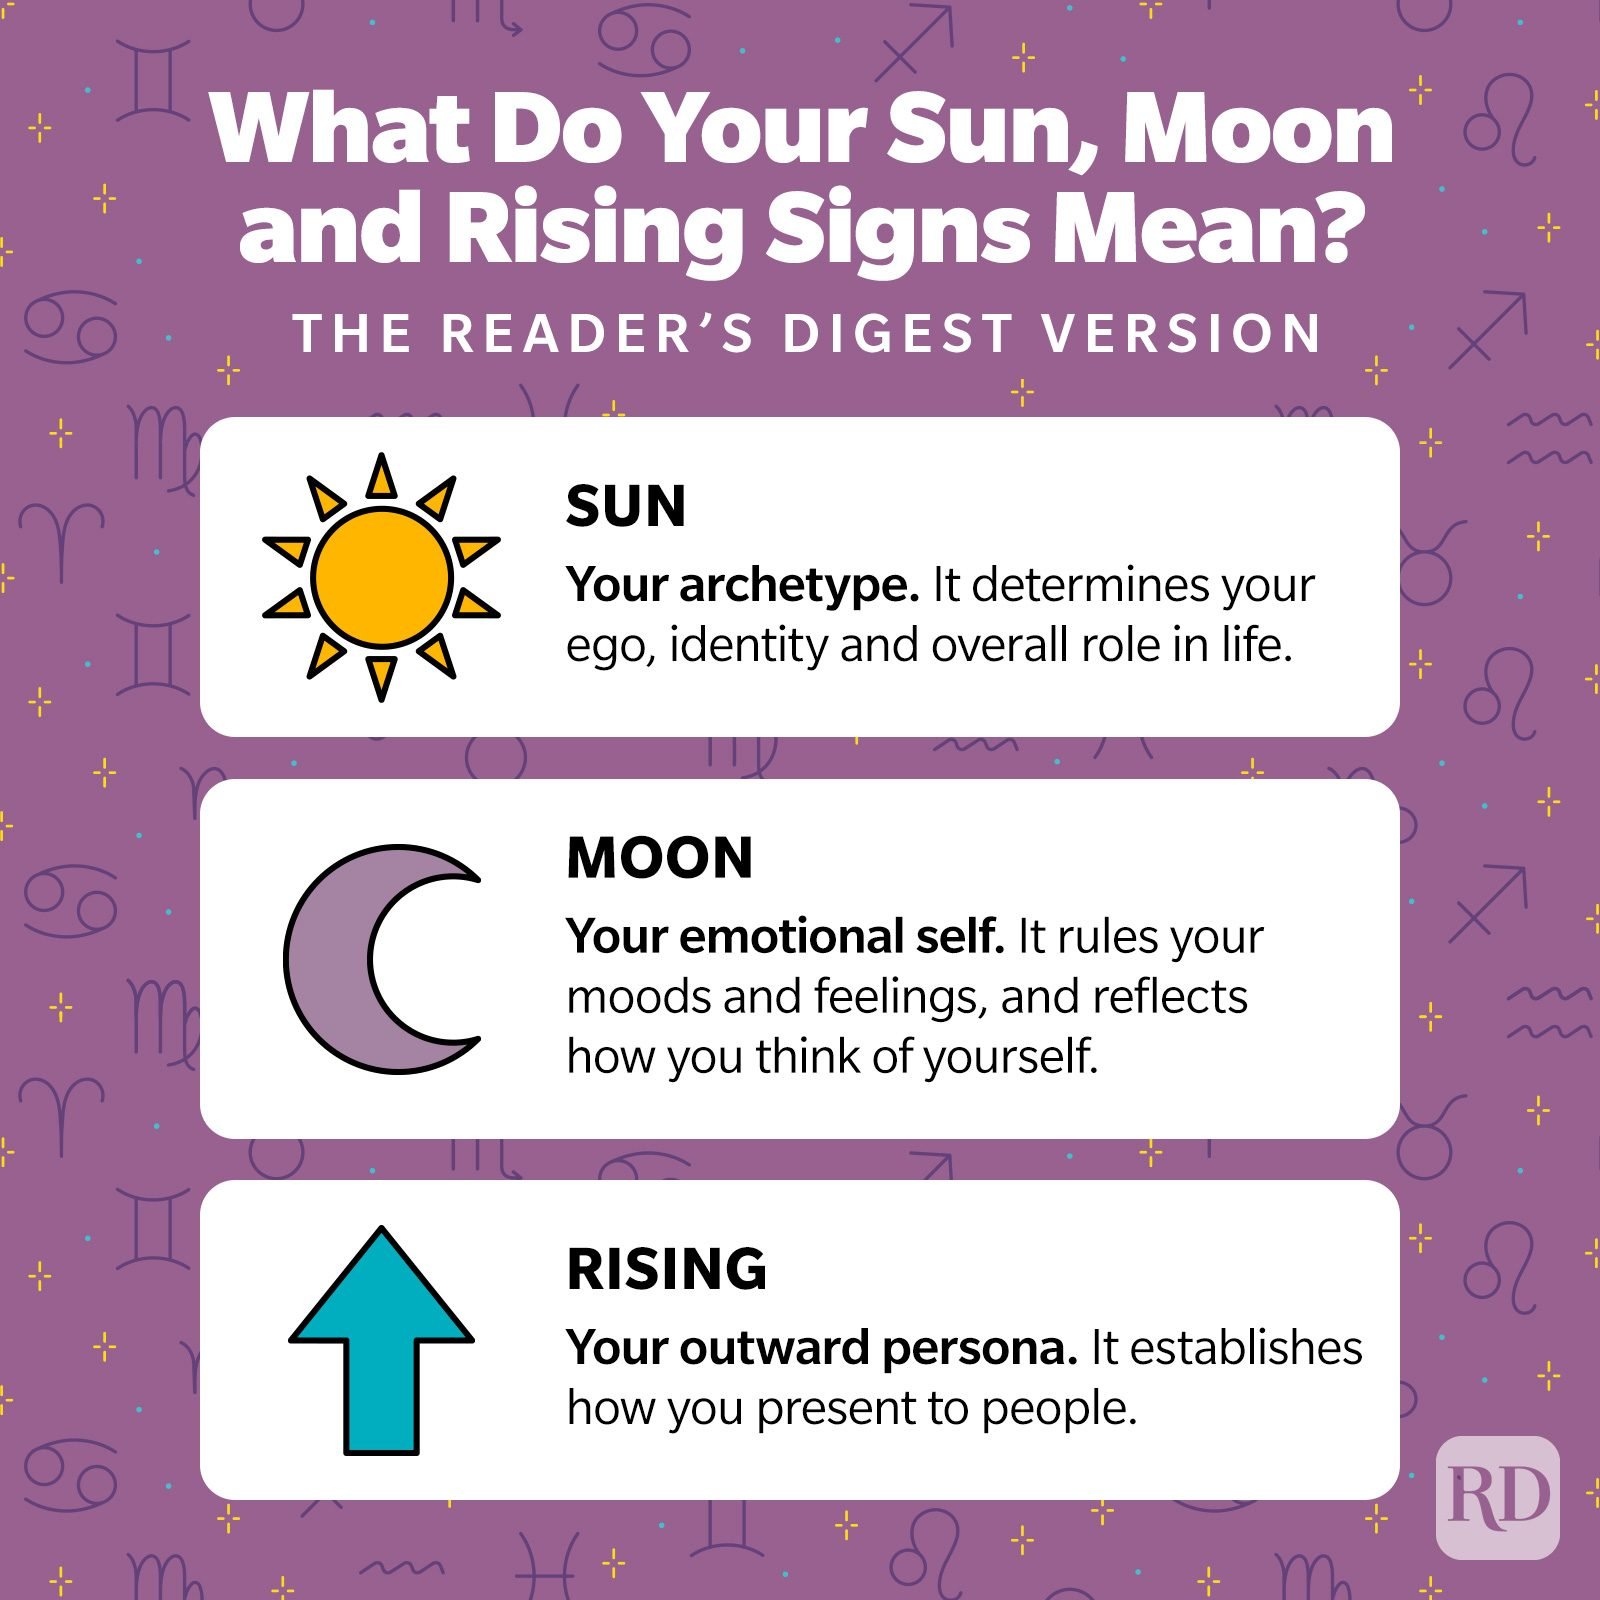 https://www.rd.com/wp-content/uploads/2023/12/What-Do-Your-Sun-Moon-and-Rising-Signs-Mean-Infographic-GettyImages-1425155757.jpg